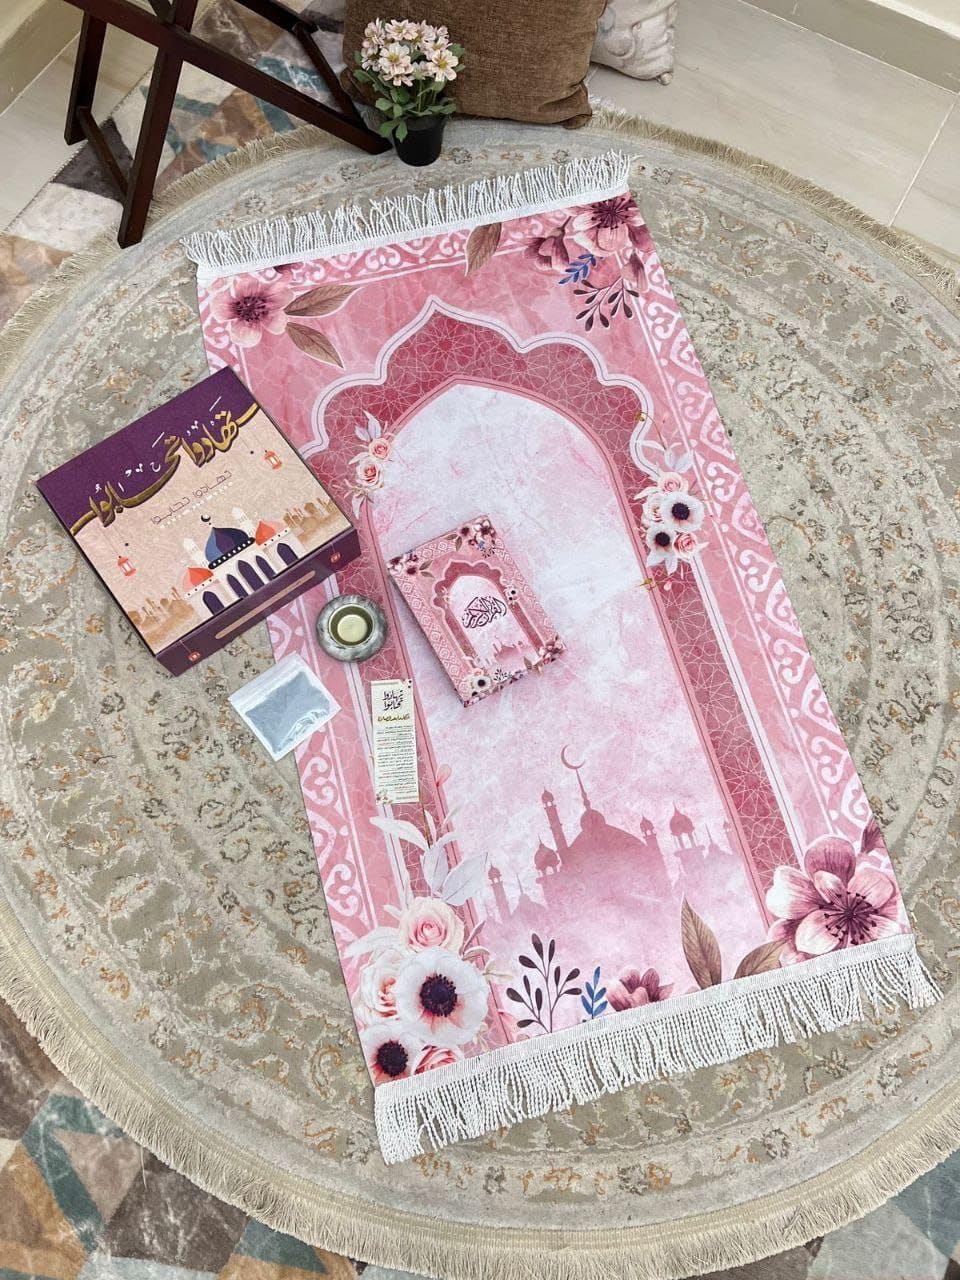 Ramadan box (velvet rug + Quran + marble incense burner + dhikr card “Quran break” + incense) Calm down and love the cleanest material (pink color)